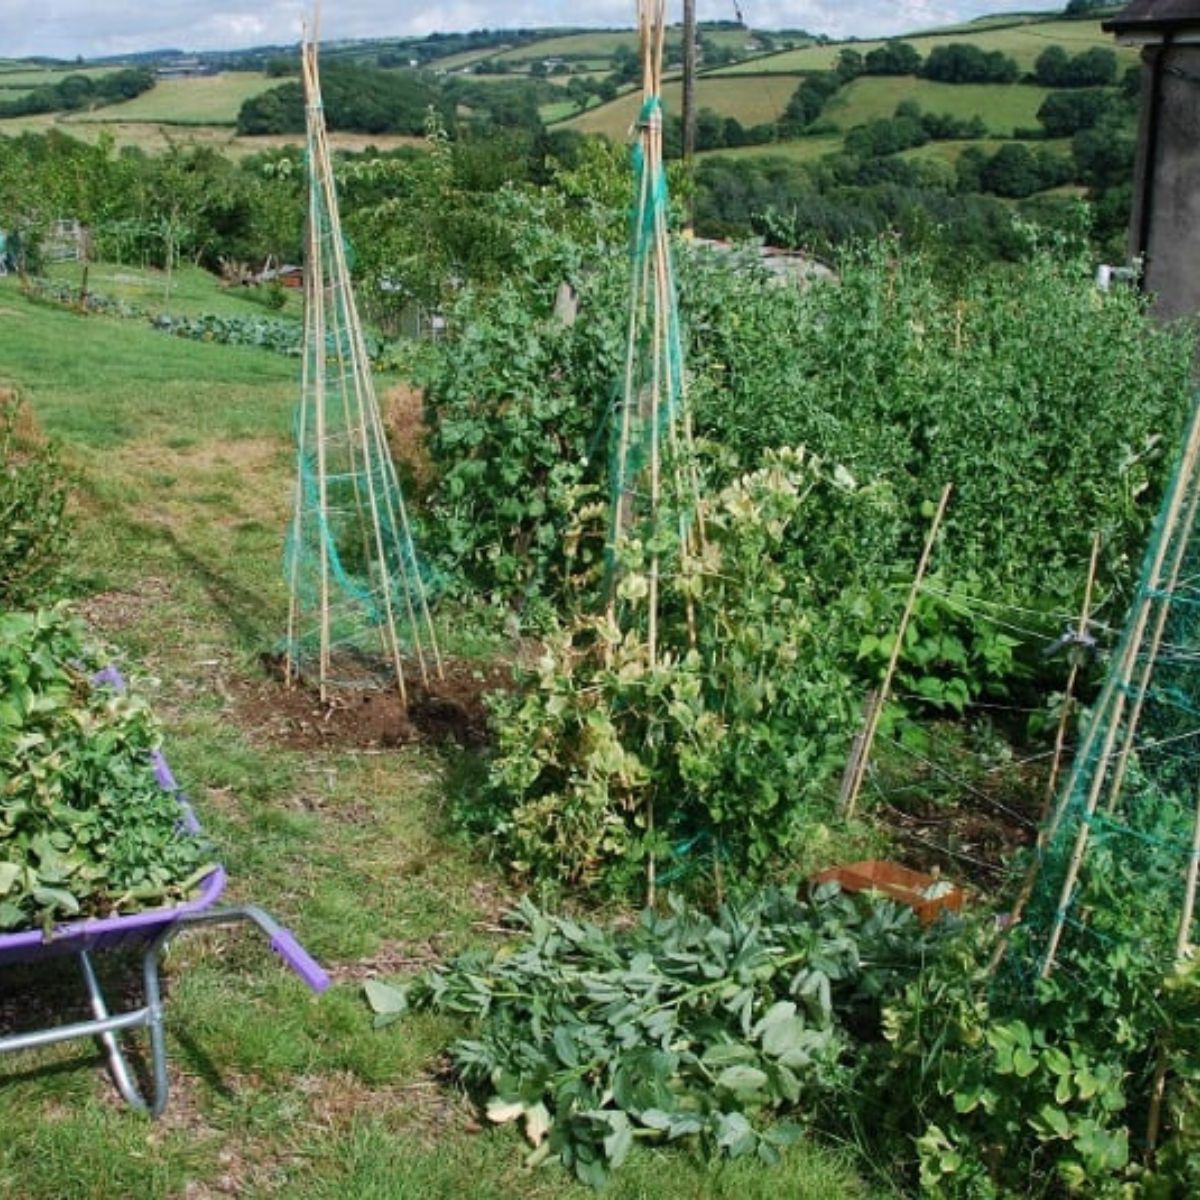 Beautiful vegetable garden with hills in the background.